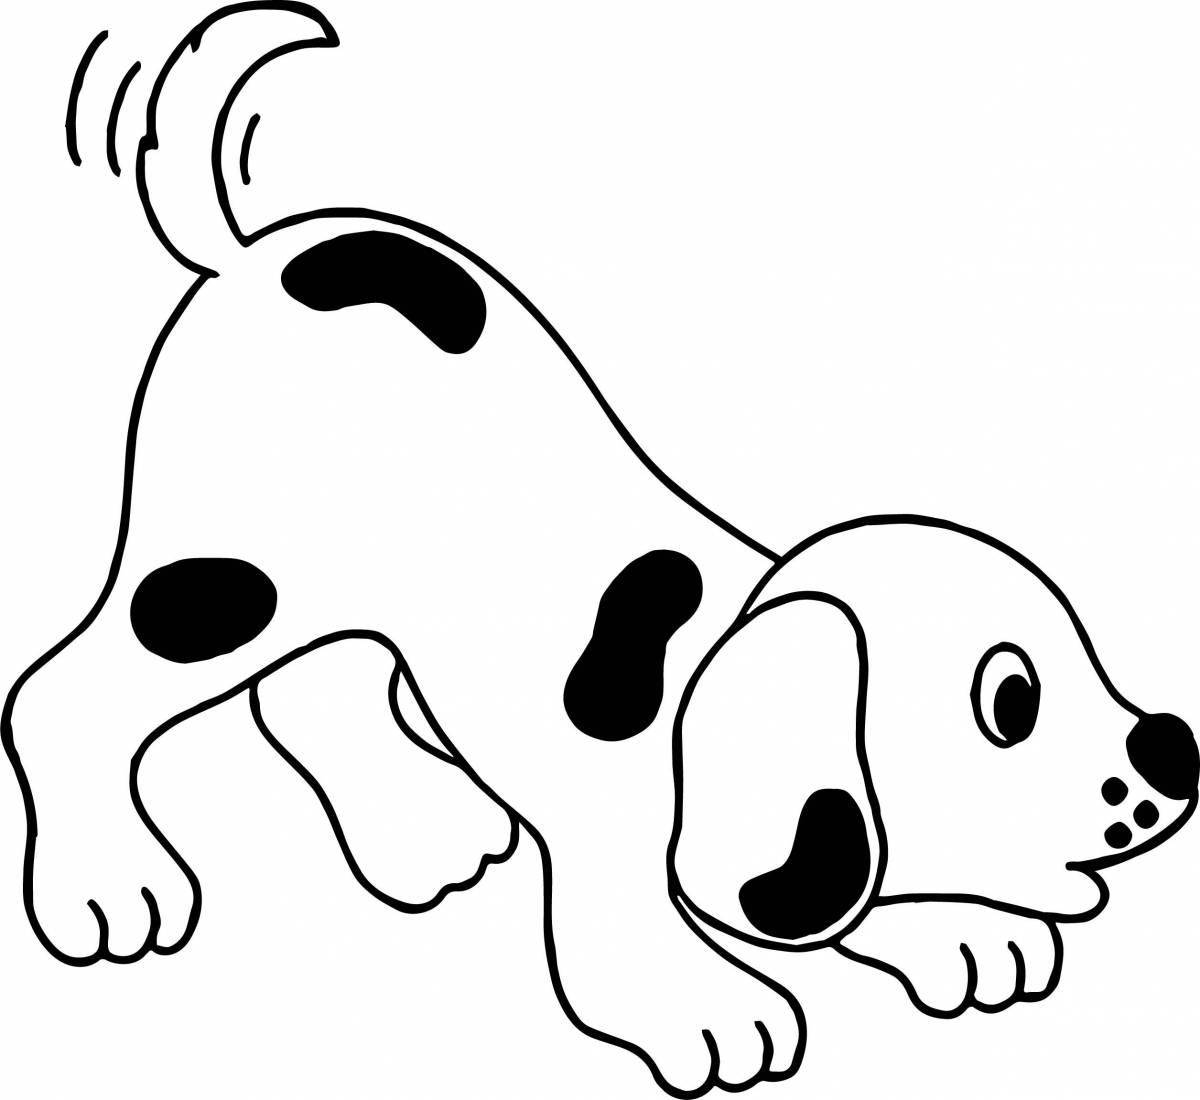 Coloring page barking puppy